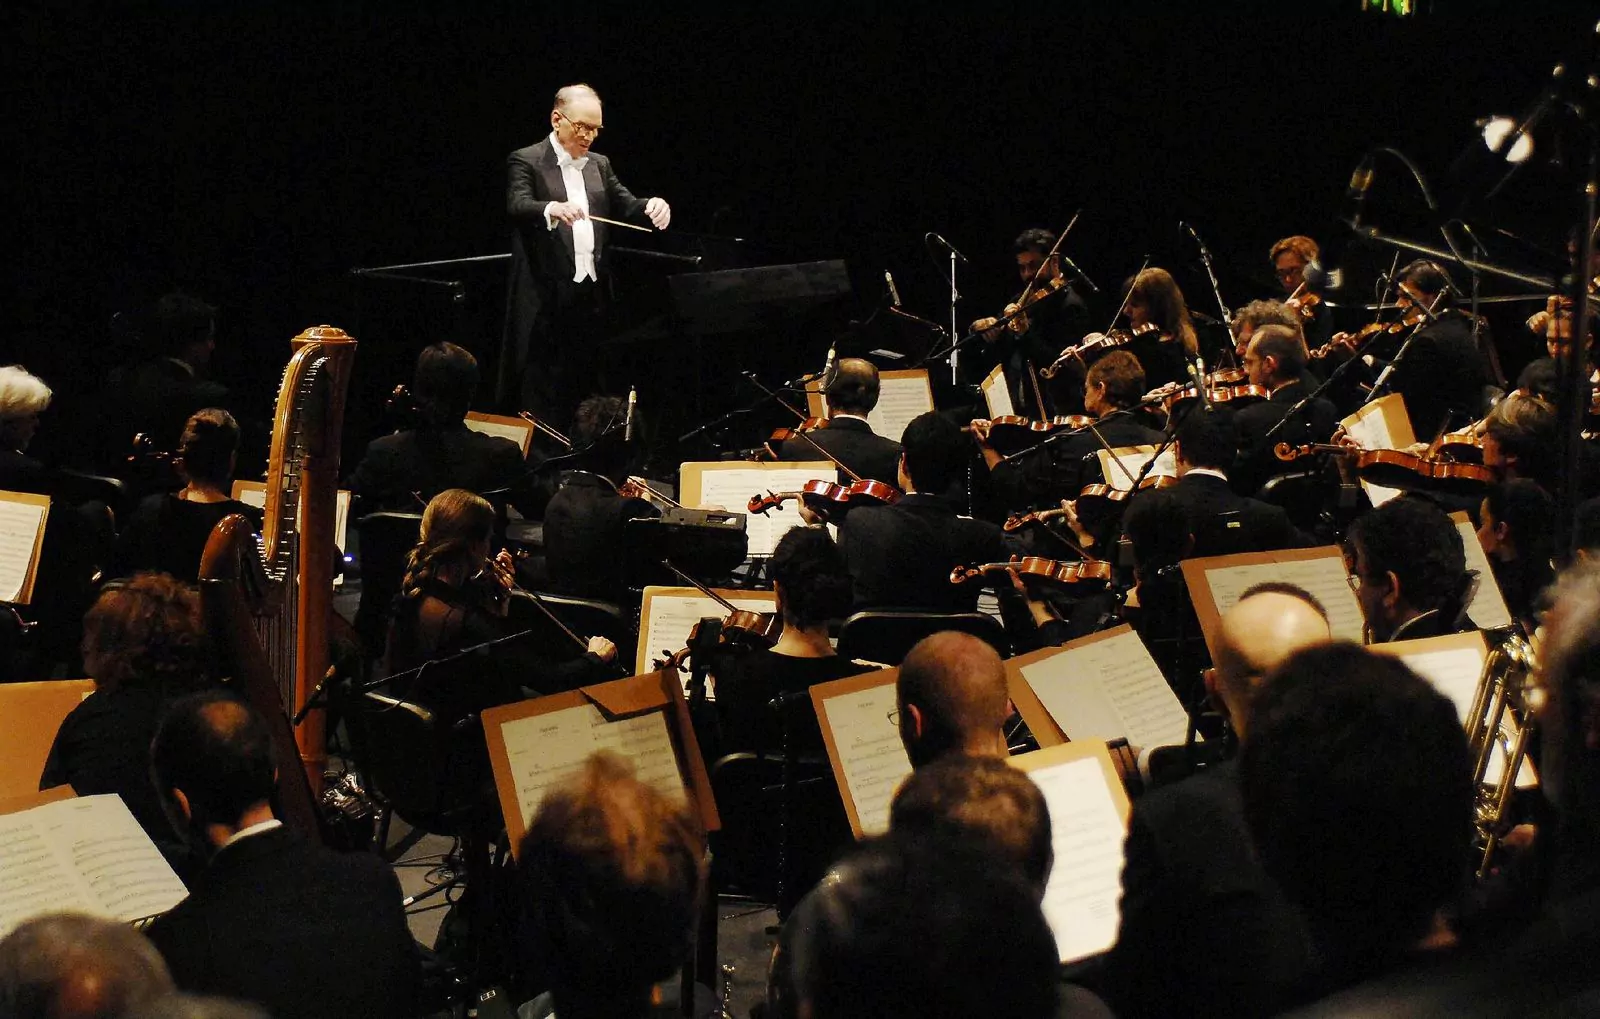 Ennio Morricone performs his classic film scores at the Hammersmith Apollo Theater in London, December 1, 2006.